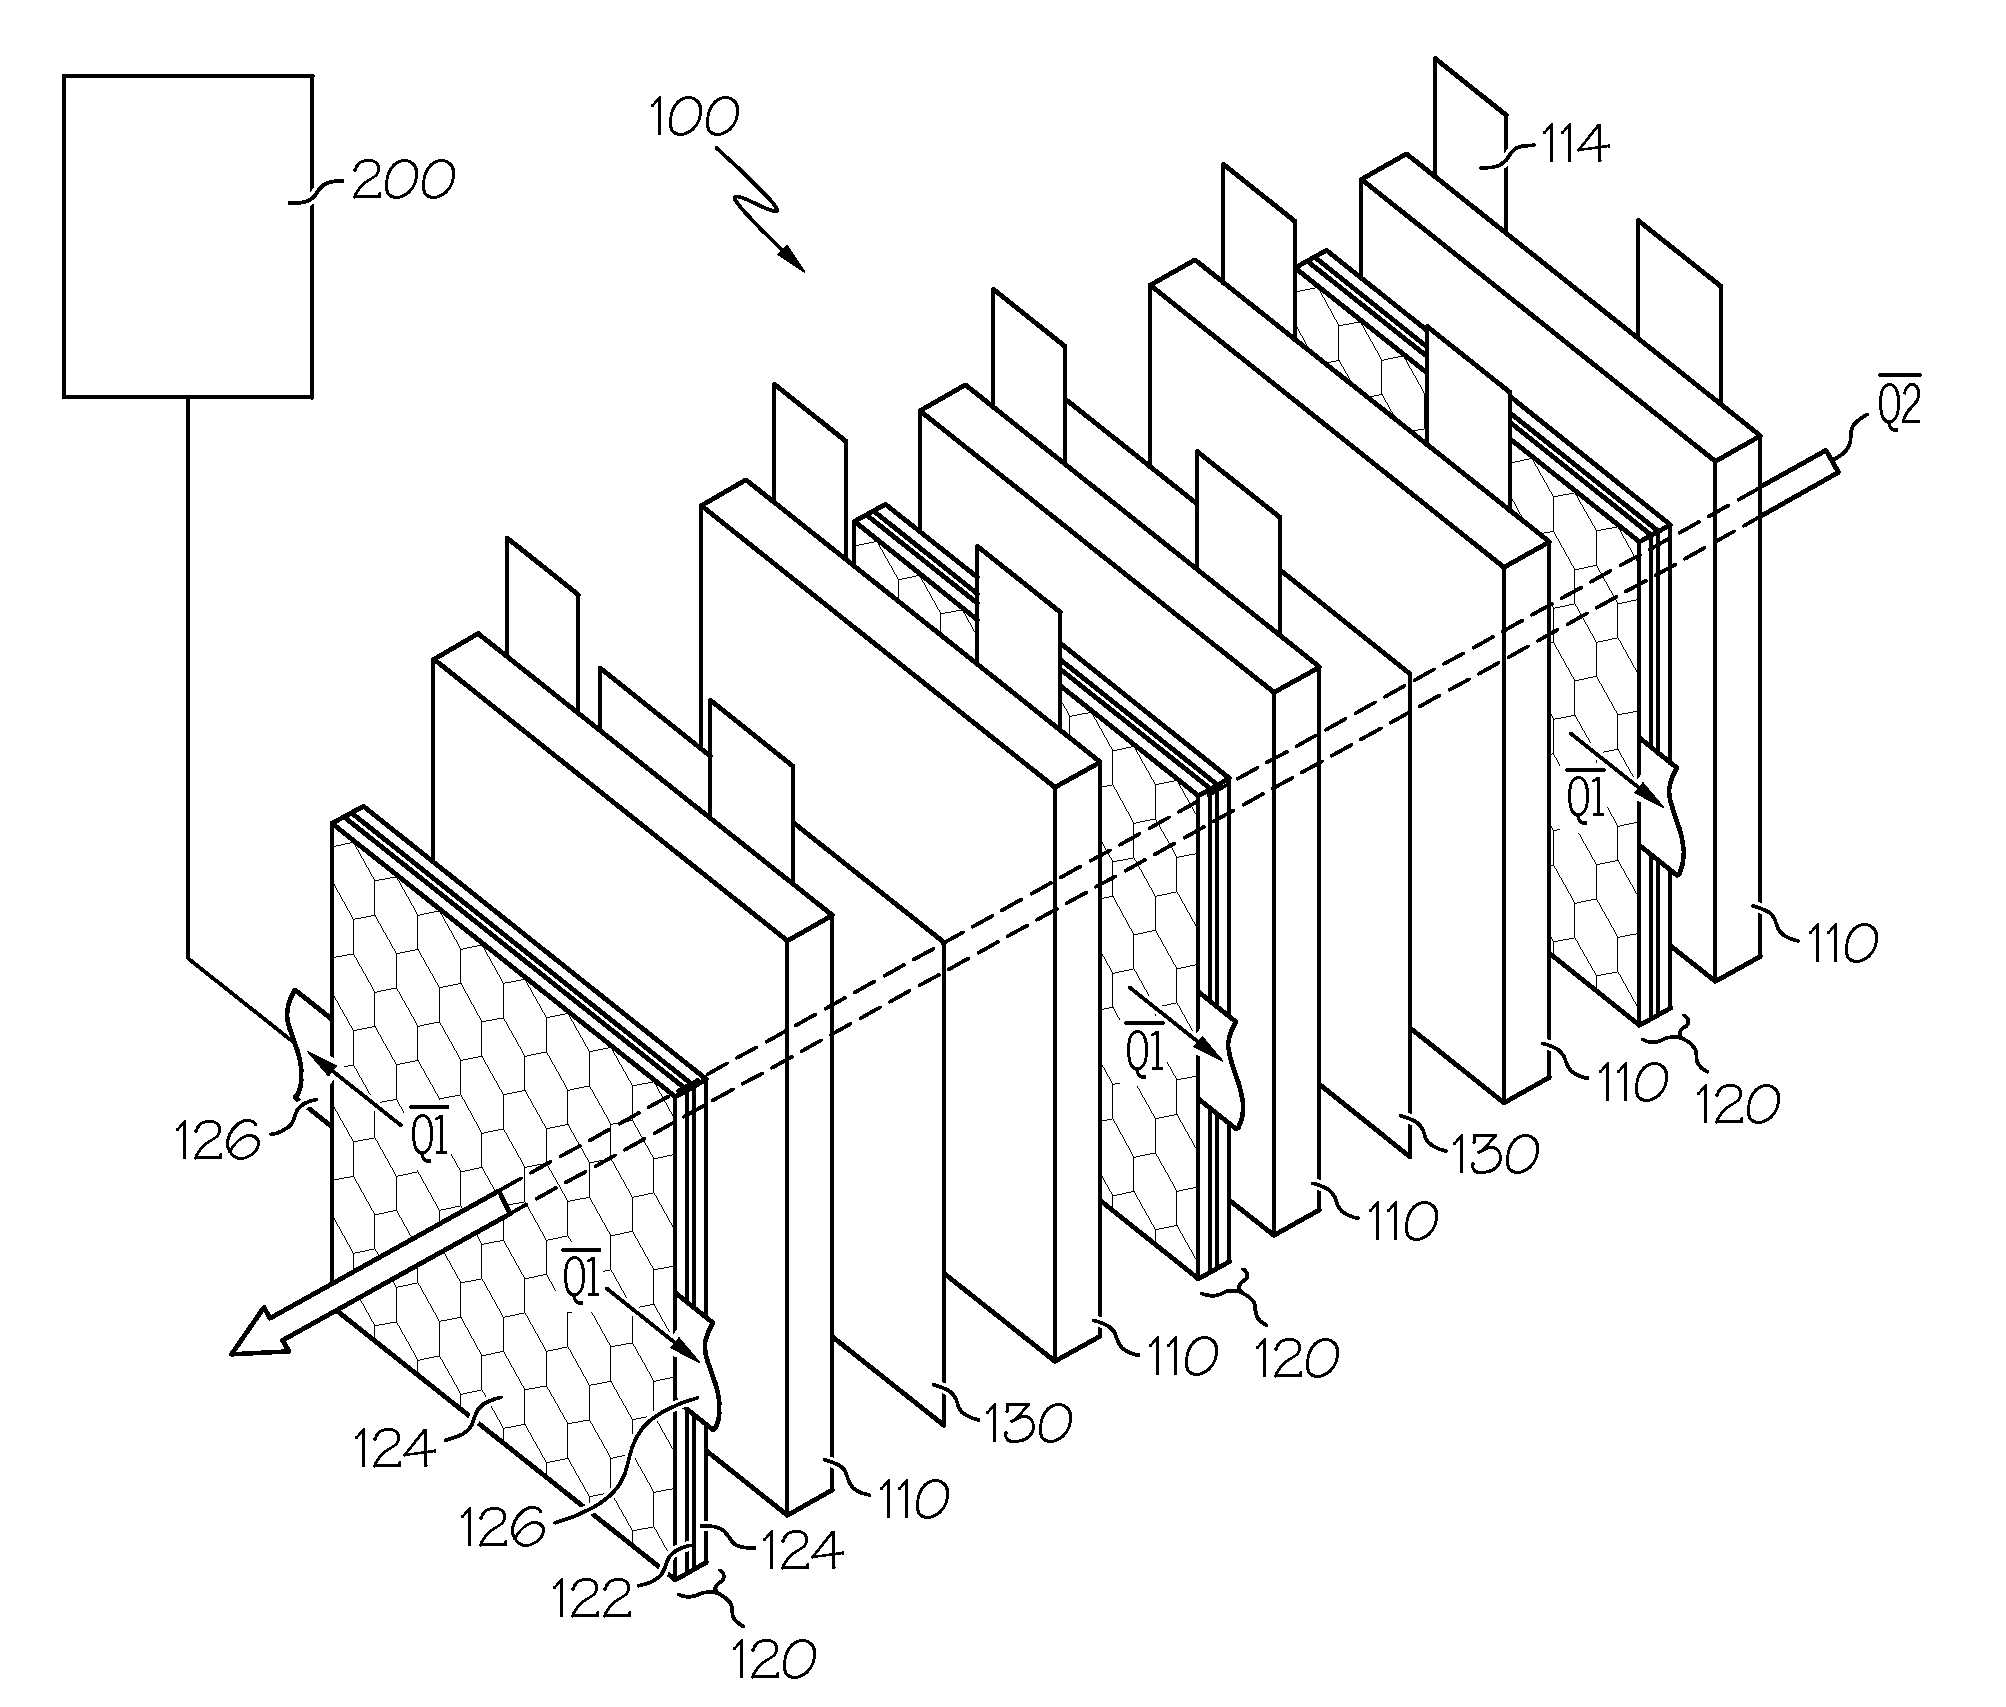 Method For Thermal Management And Mitigation Of Thermal Propagation For Batteries Using A Graphene Coated Polymer Barrier Substrate